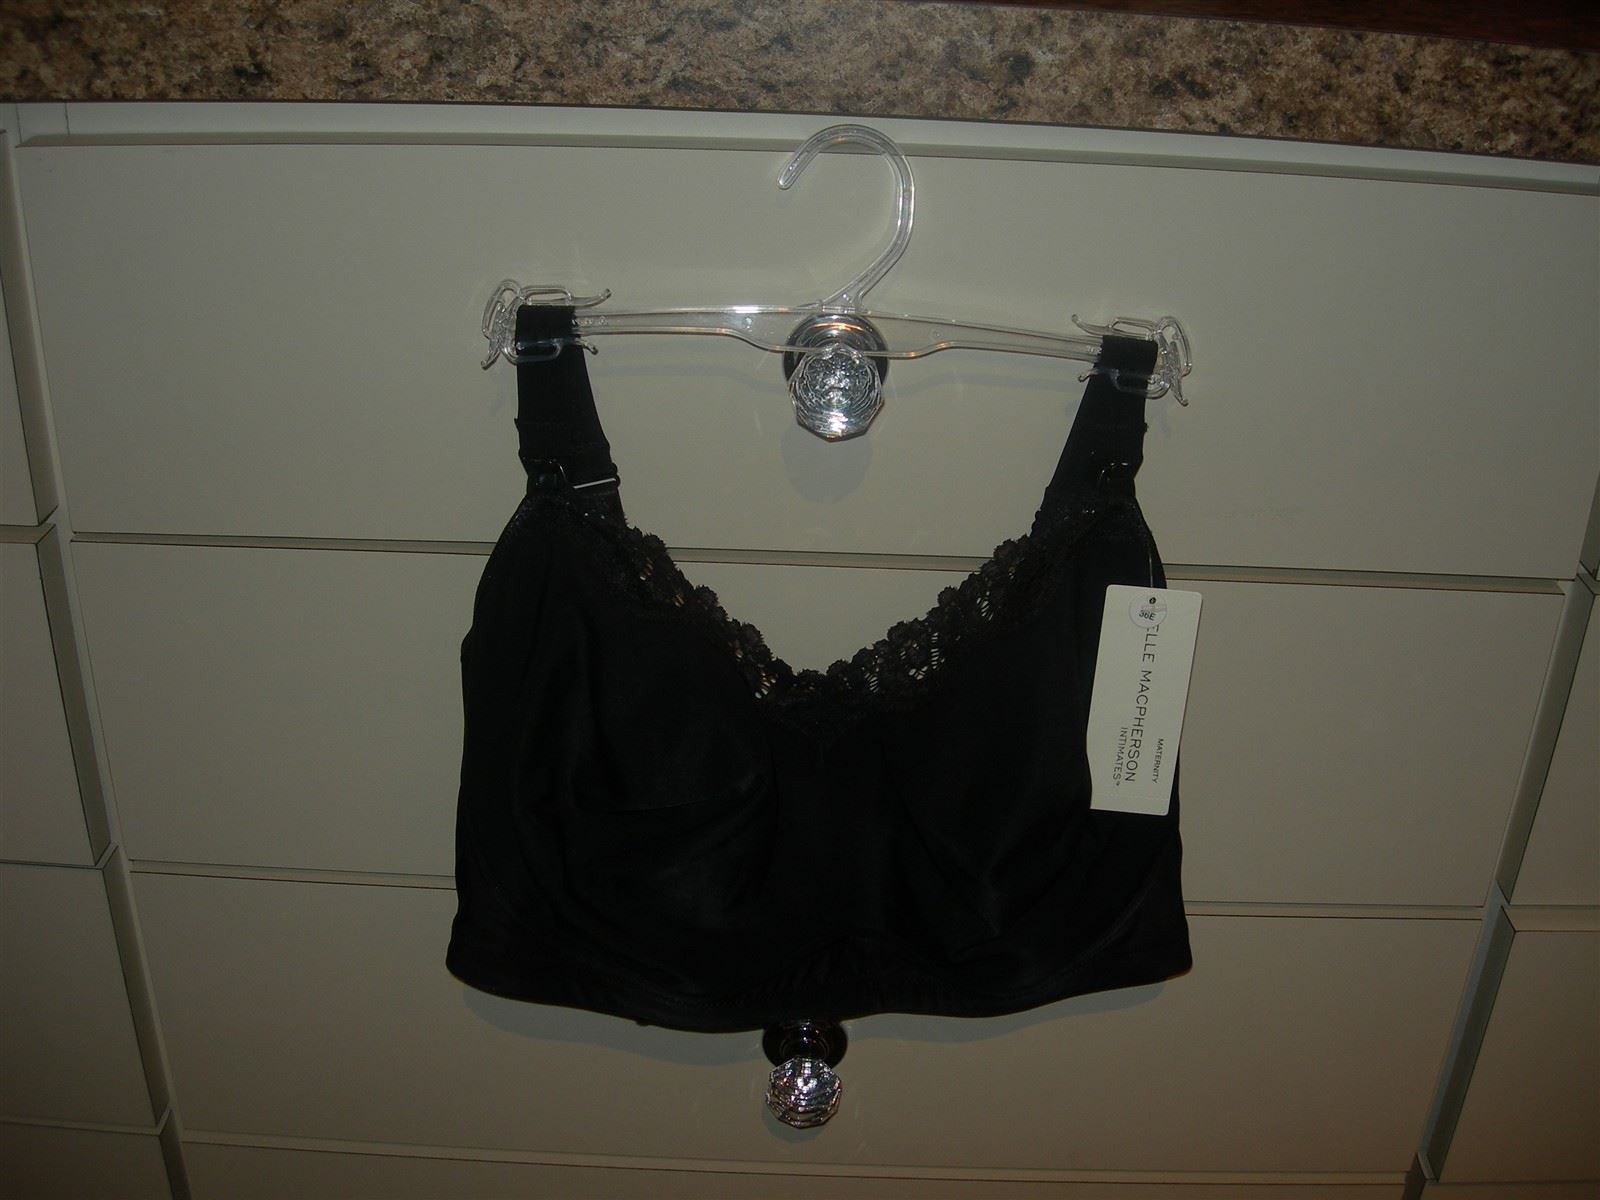 Krystyna's Favorite Nursing Bra : by Elle McPherson - also available in black, I have one of these in my drawer to wear under my black blouses or dresses.